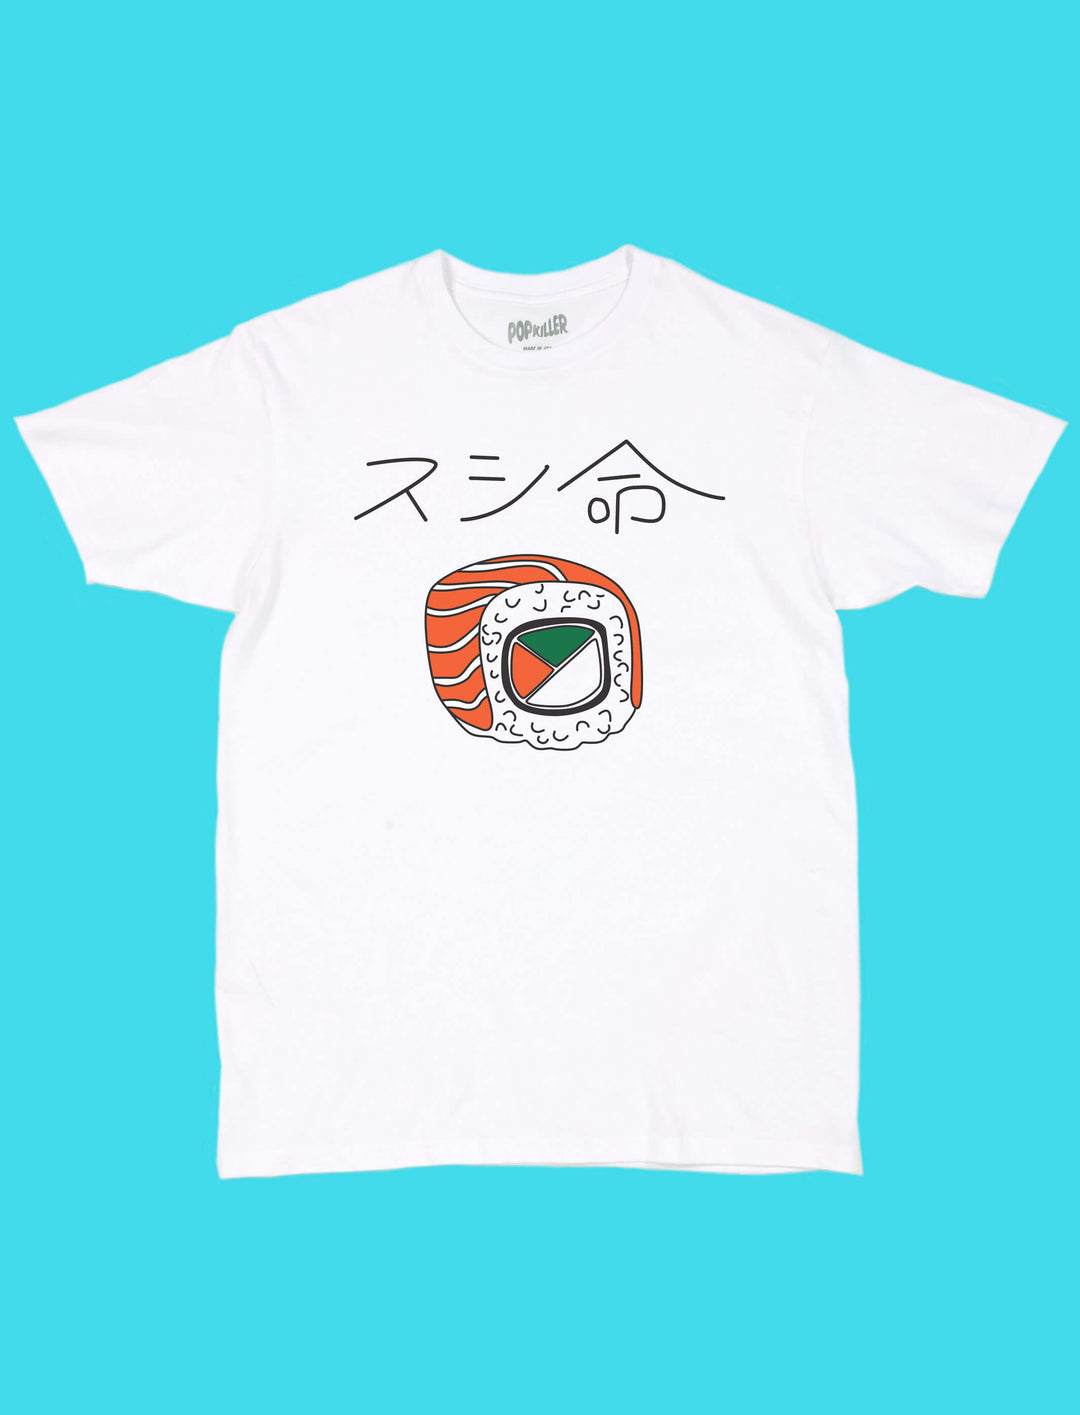 Japanese sushi lover graphic t-shirt.